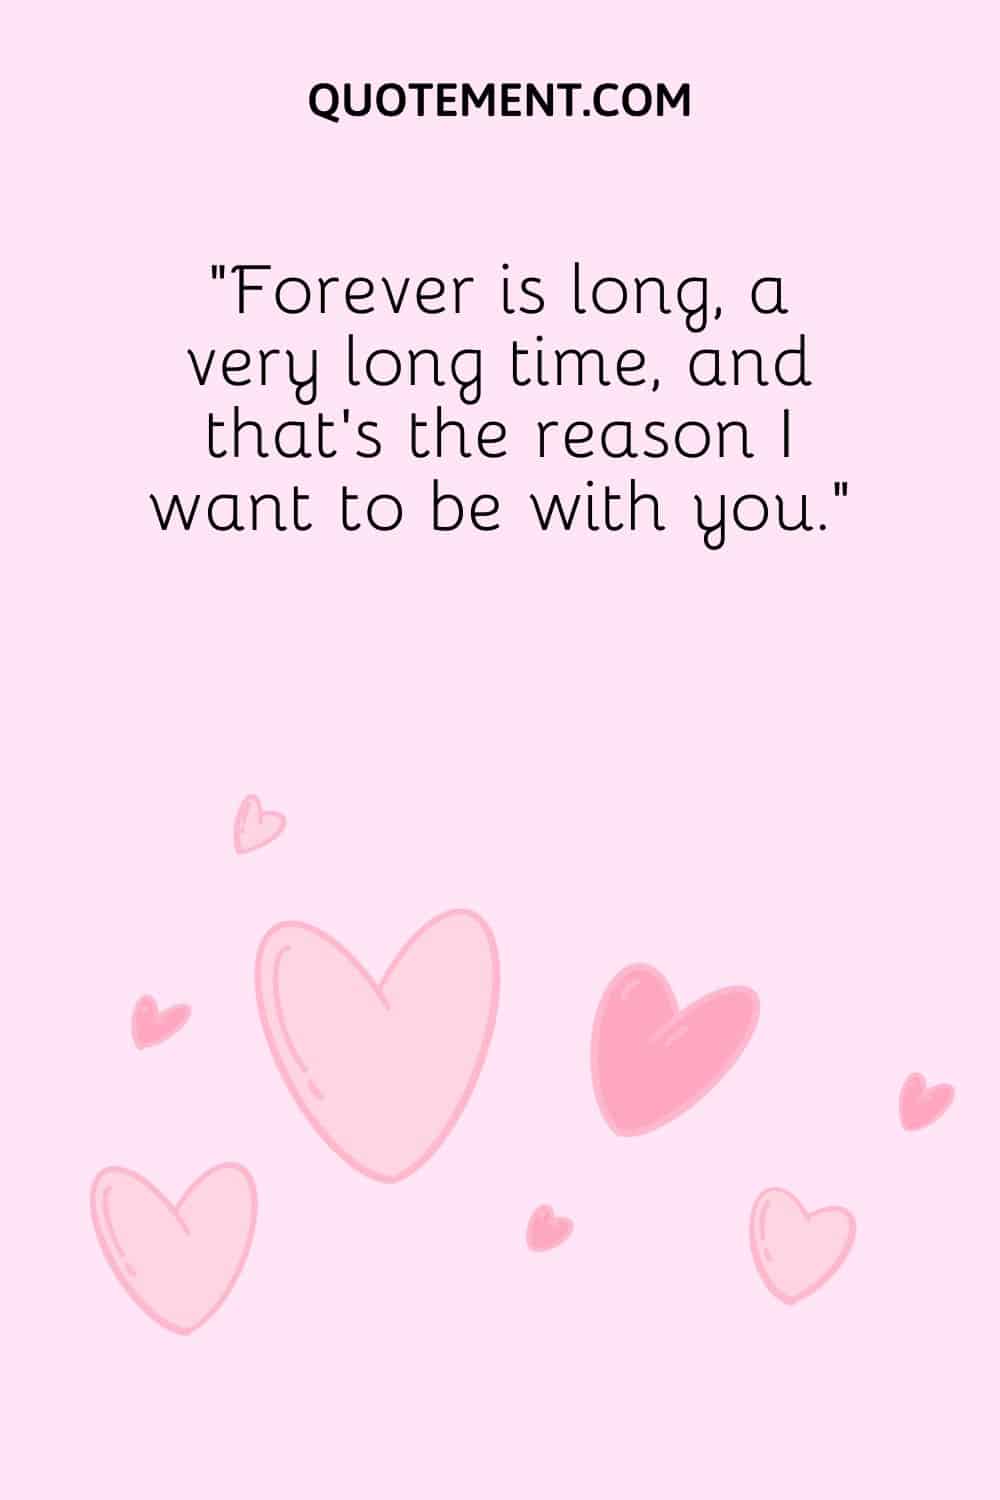 “Forever is long, a very long time, and that’s the reason I want to be with you.”